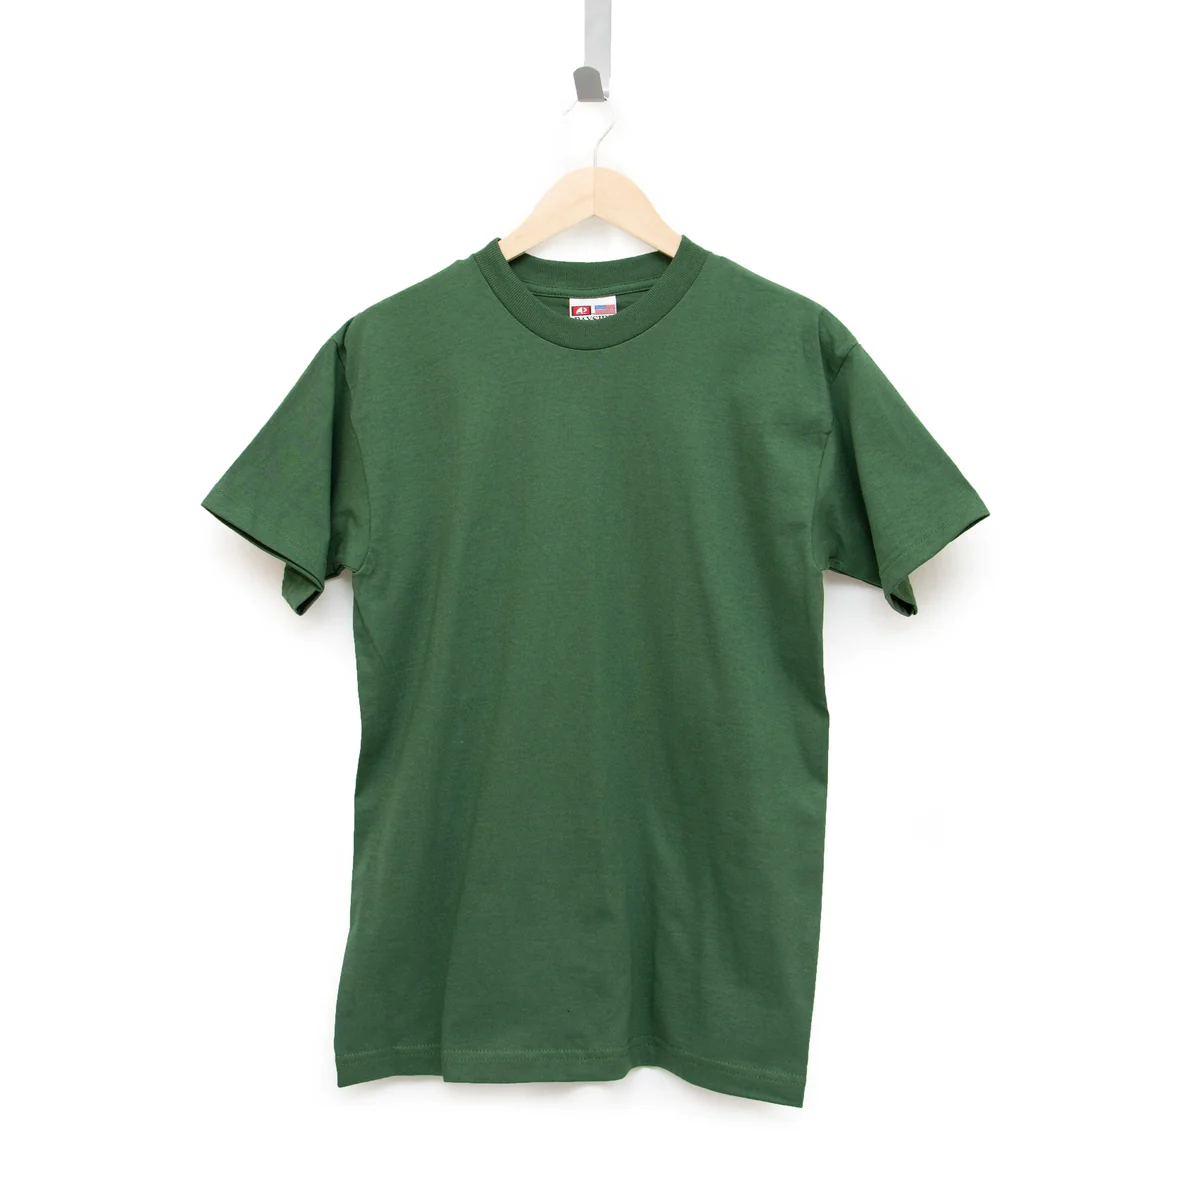 All American Clothing Co. STANDARD COLORED HEAVYWEIGHT 100% COTTON T-SHIRT posted by ProdOrigin USA in Men's Apparel